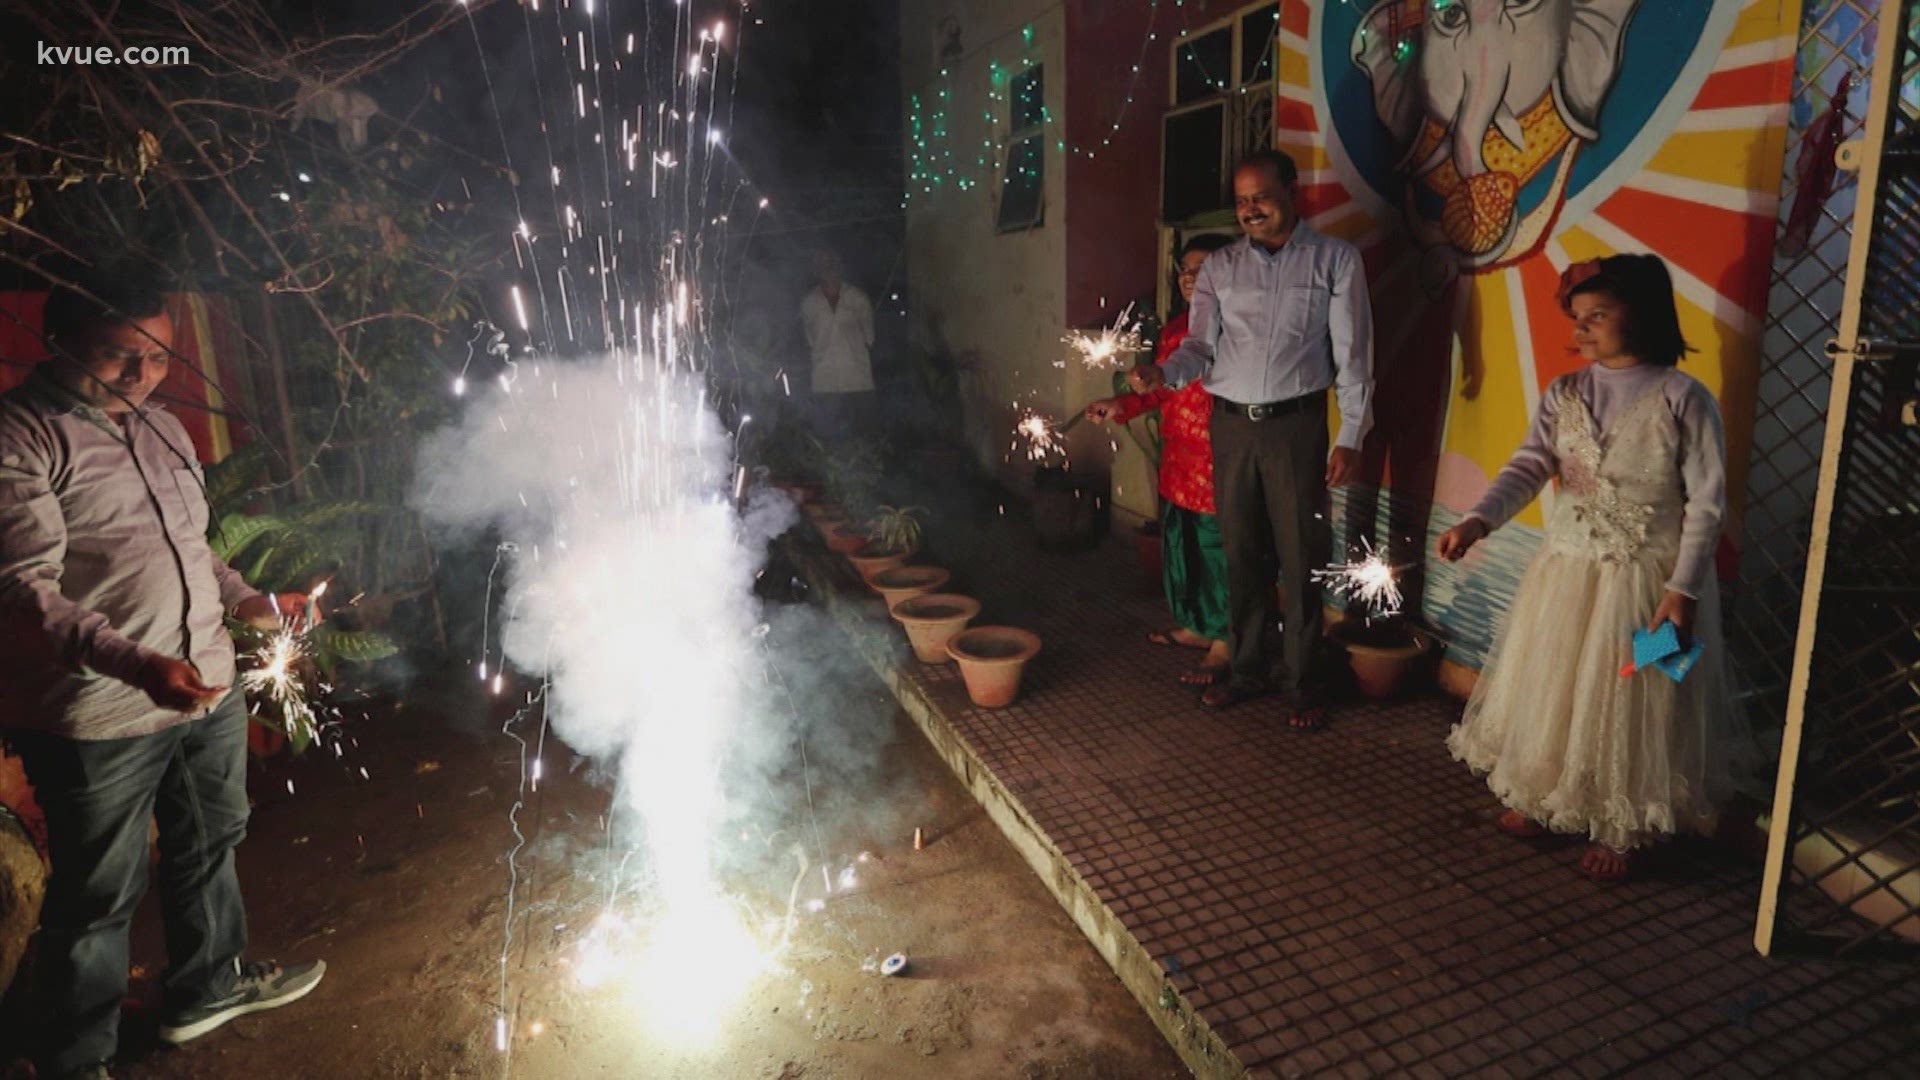 Diwali celebrations for 2020 began around the world on Saturday. The festival of lights lasts for the next five days.